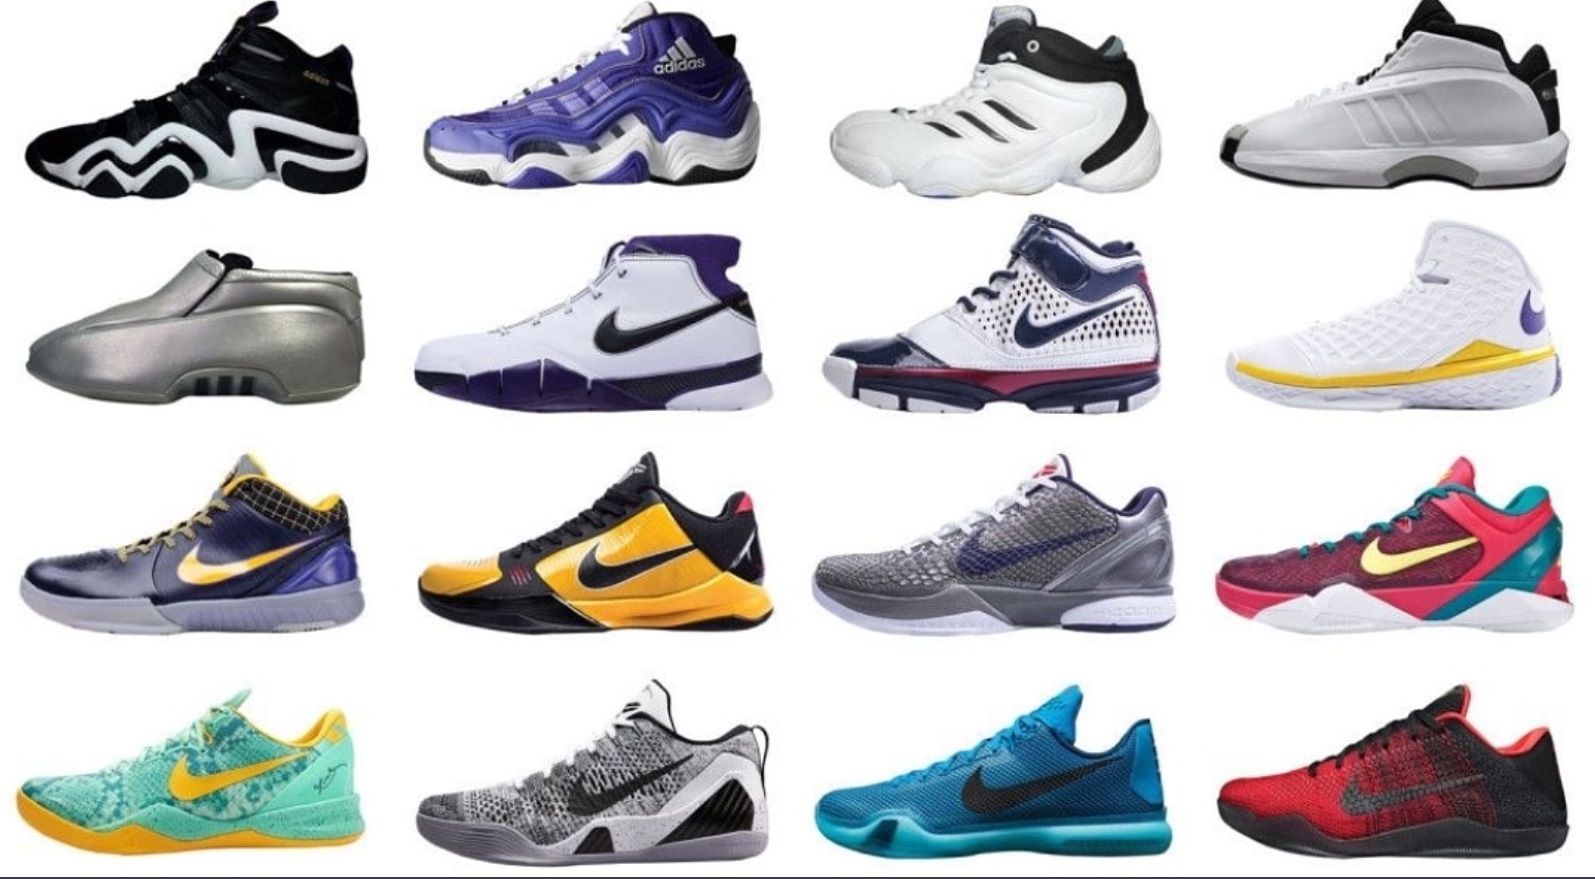 all of kobe's signature shoes